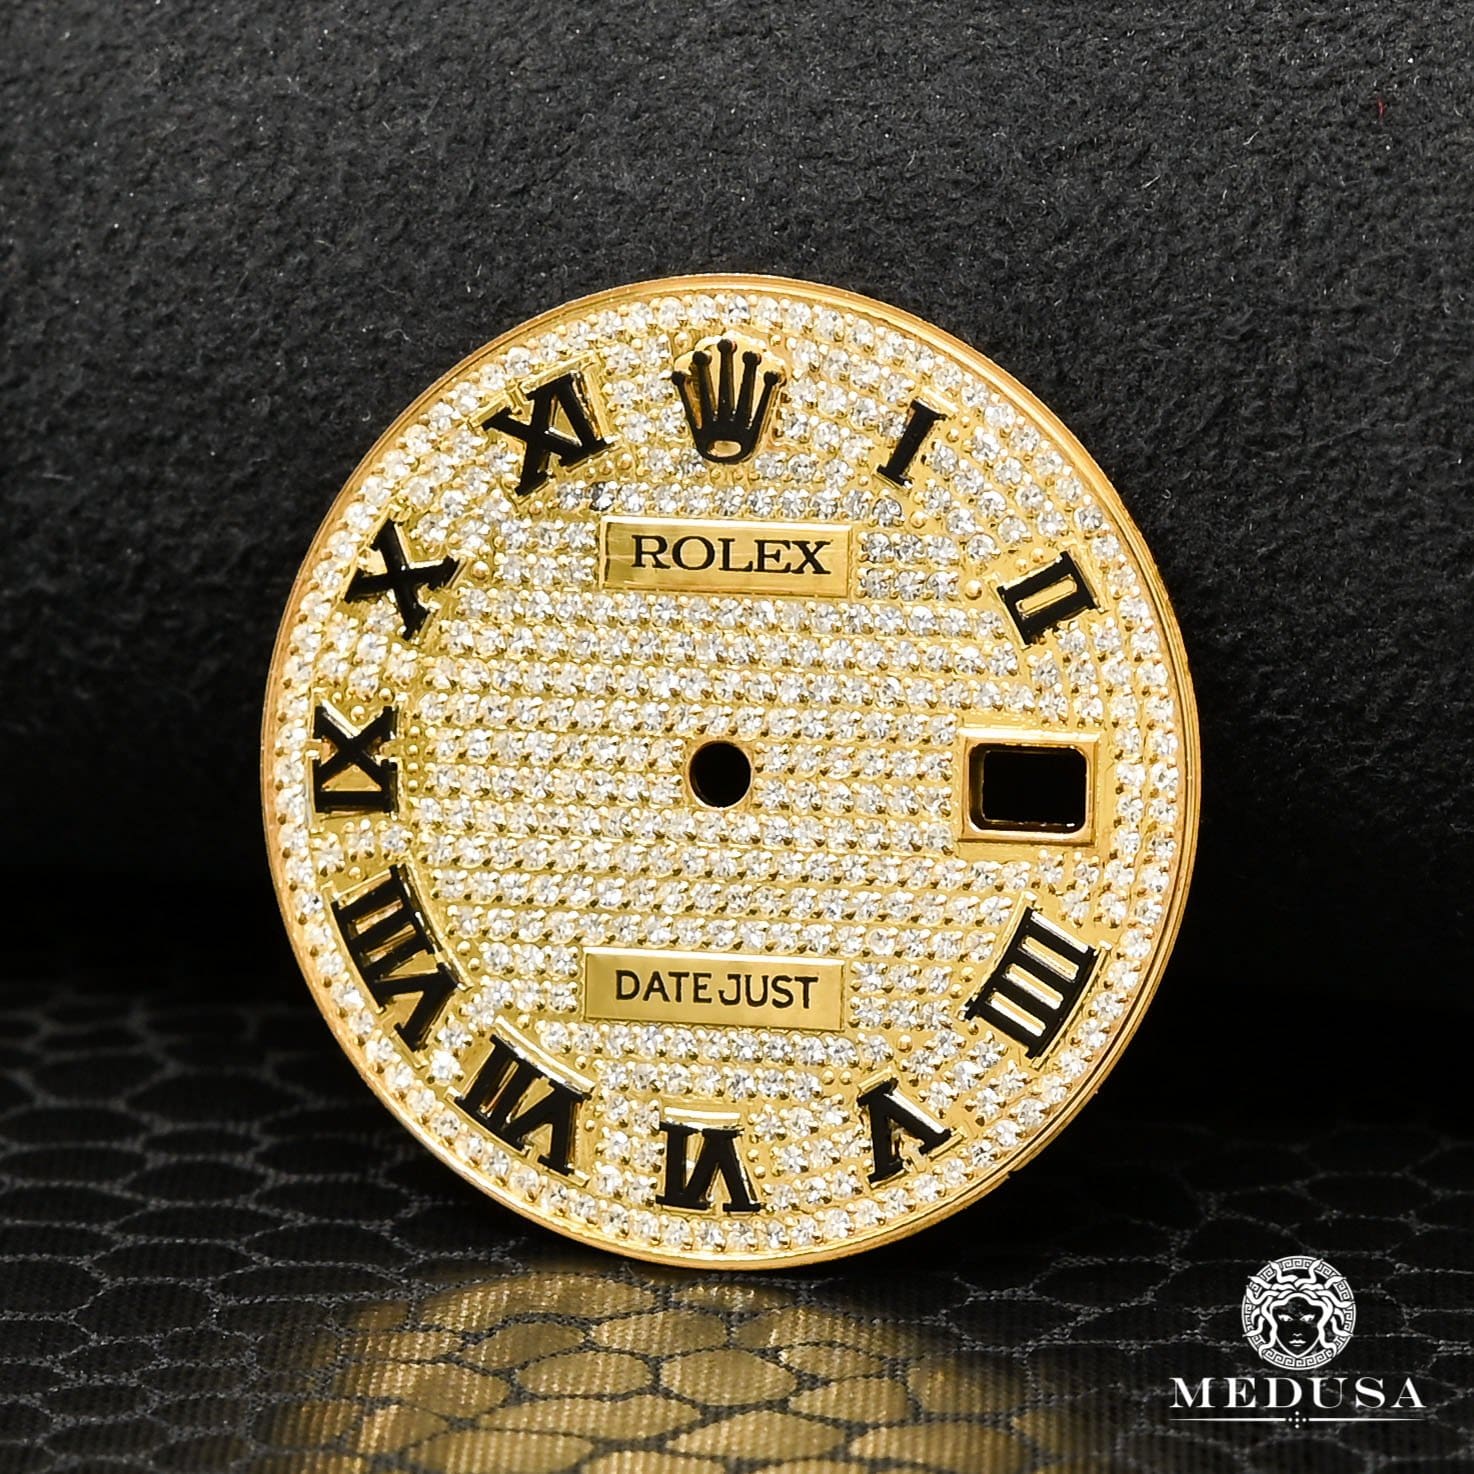 Montre Rolex | Homme 36mm Dial Gold Iced Or Jaune